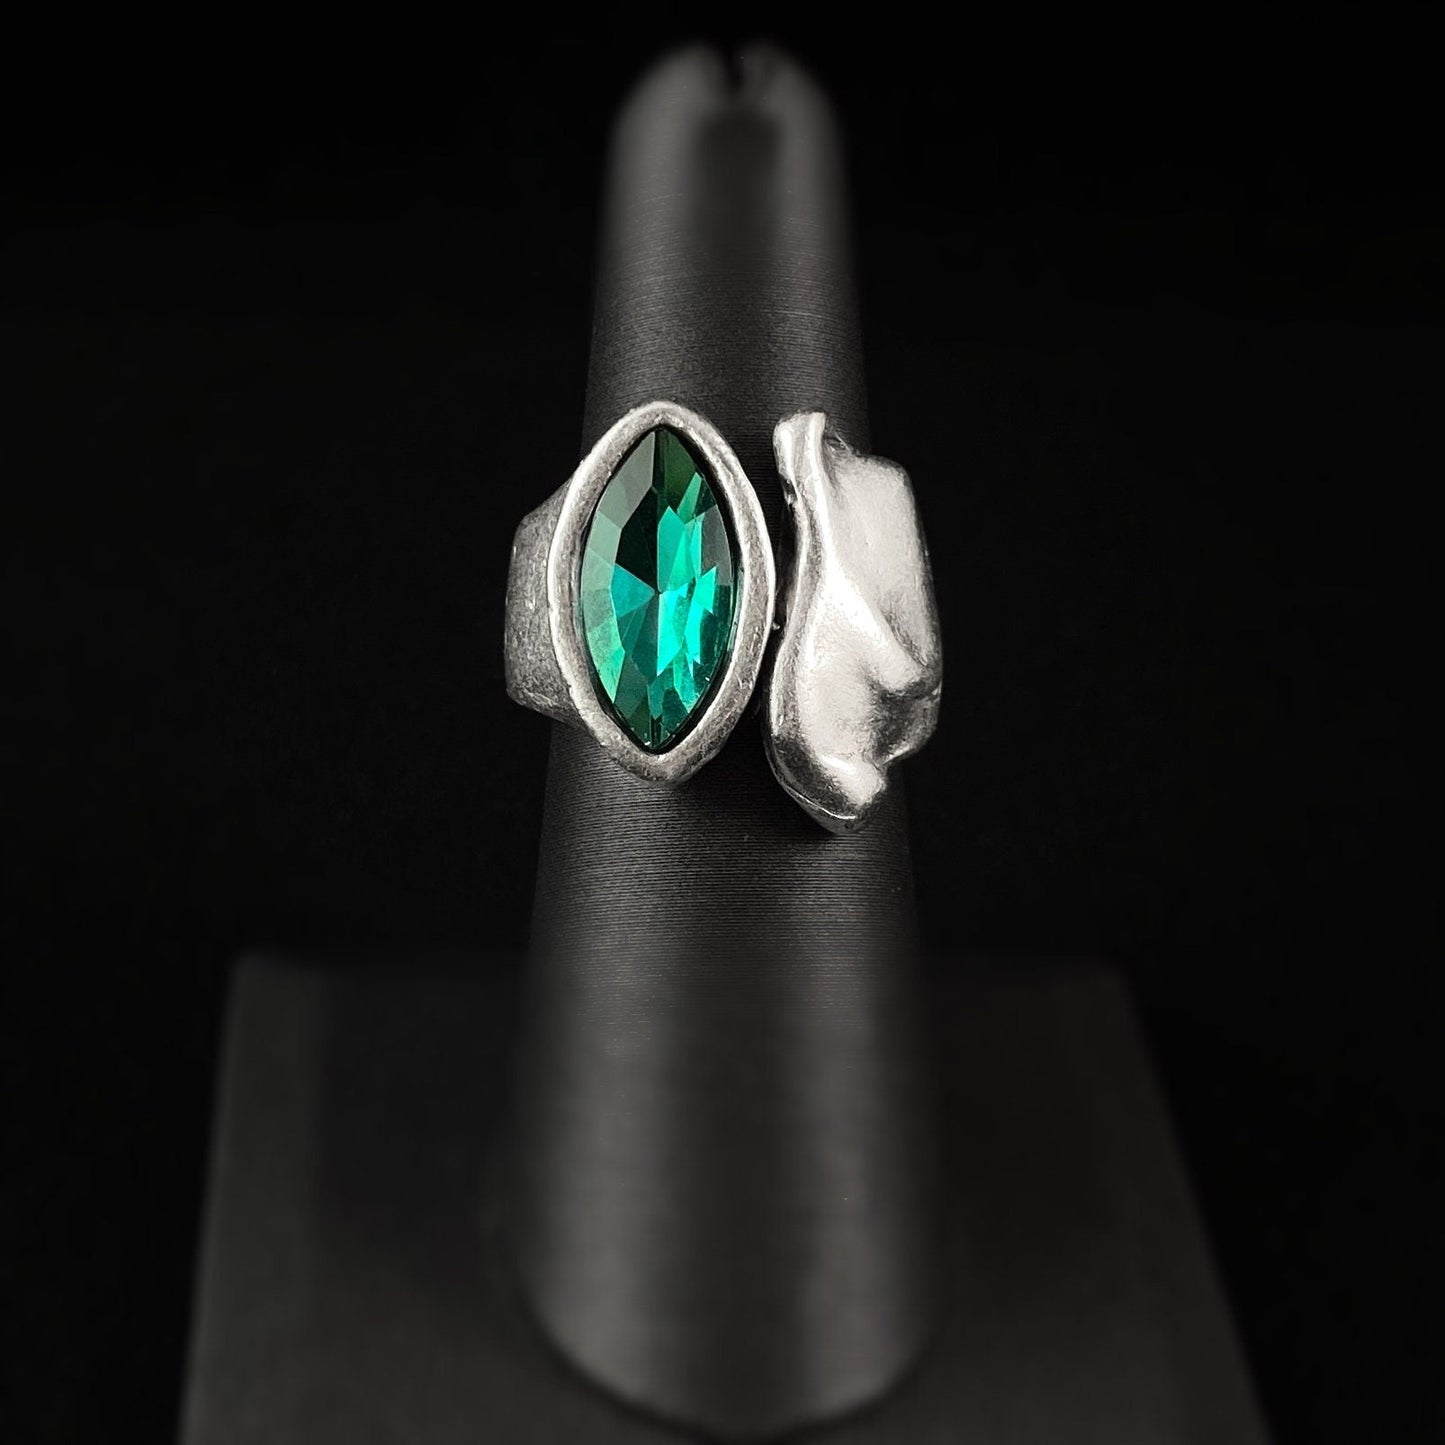 Chunky Silver Ring with Emerald Colored Crystal, Handmade, Nickel Free - Noir